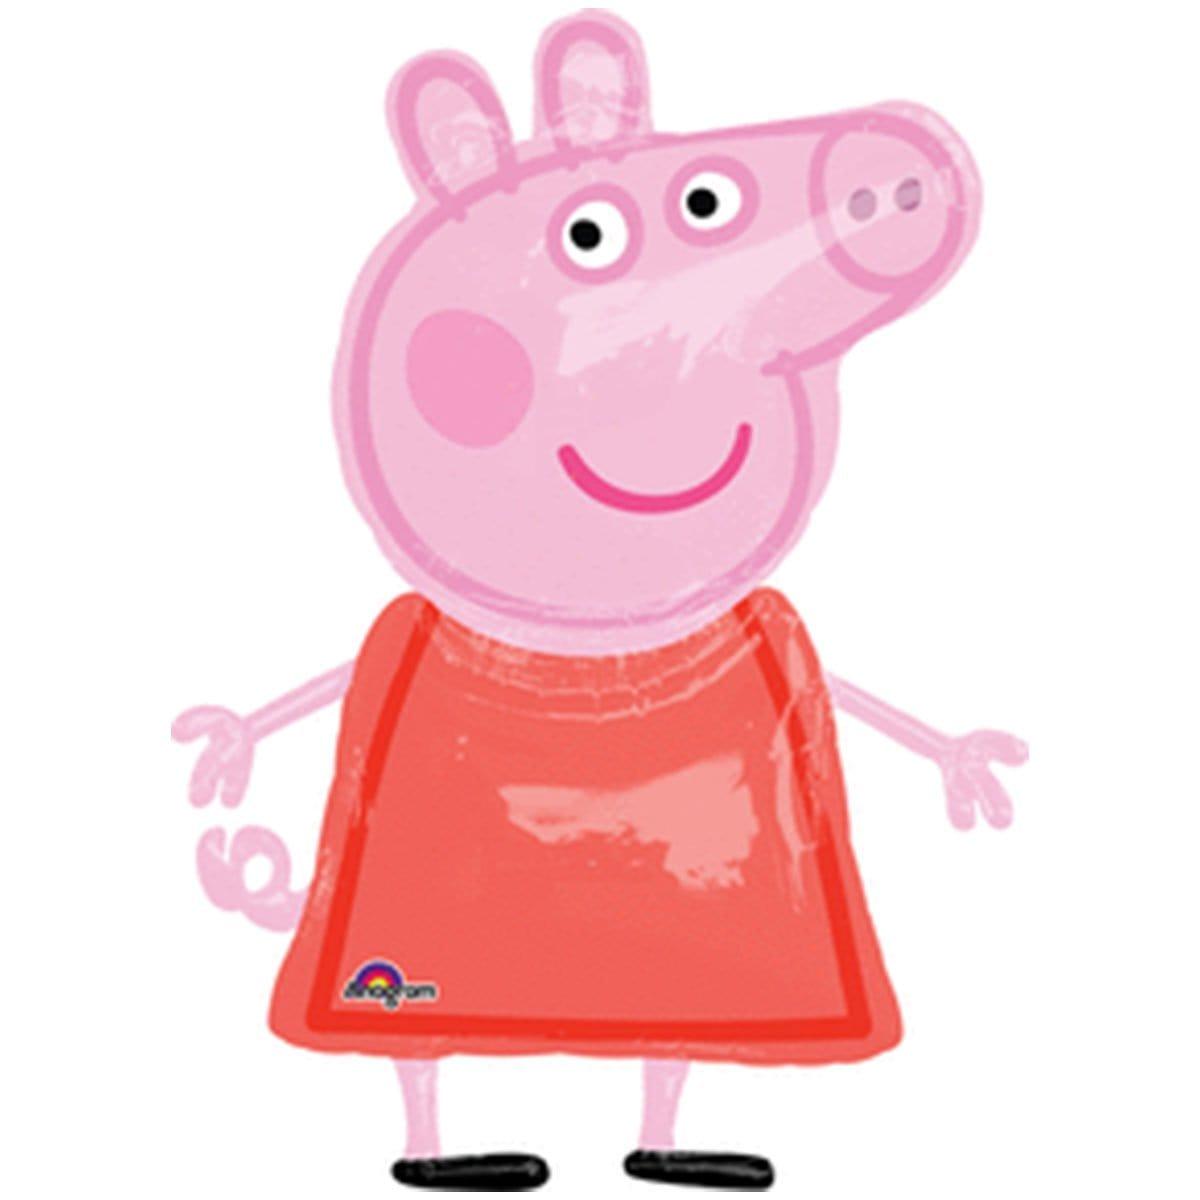 Buy Balloons Giant Peppa Pig Air Walker Balloon sold at Party Expert